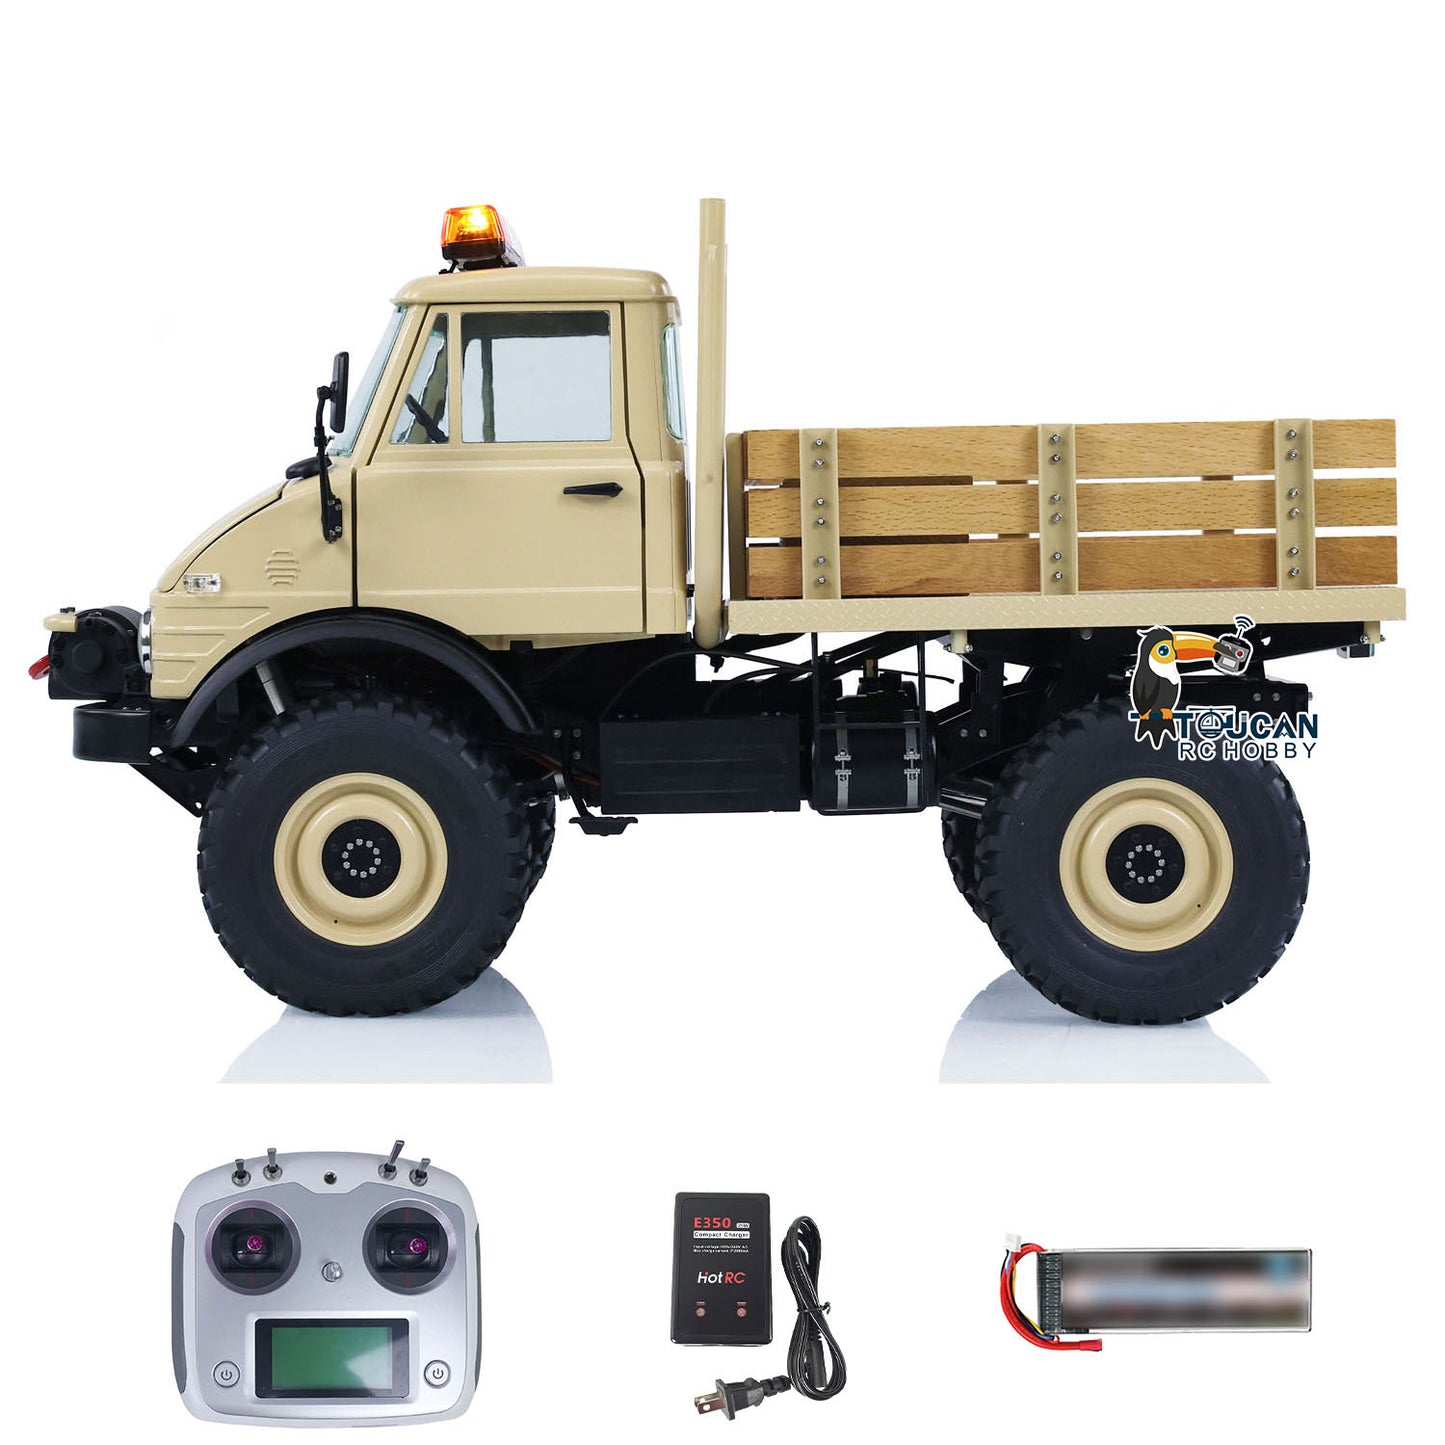 LESU 4x4 1/10 UM406 RC Off-Road Truck for Remote Control Painted Assembled Car W/ FS i6S Radio Electronic Parts